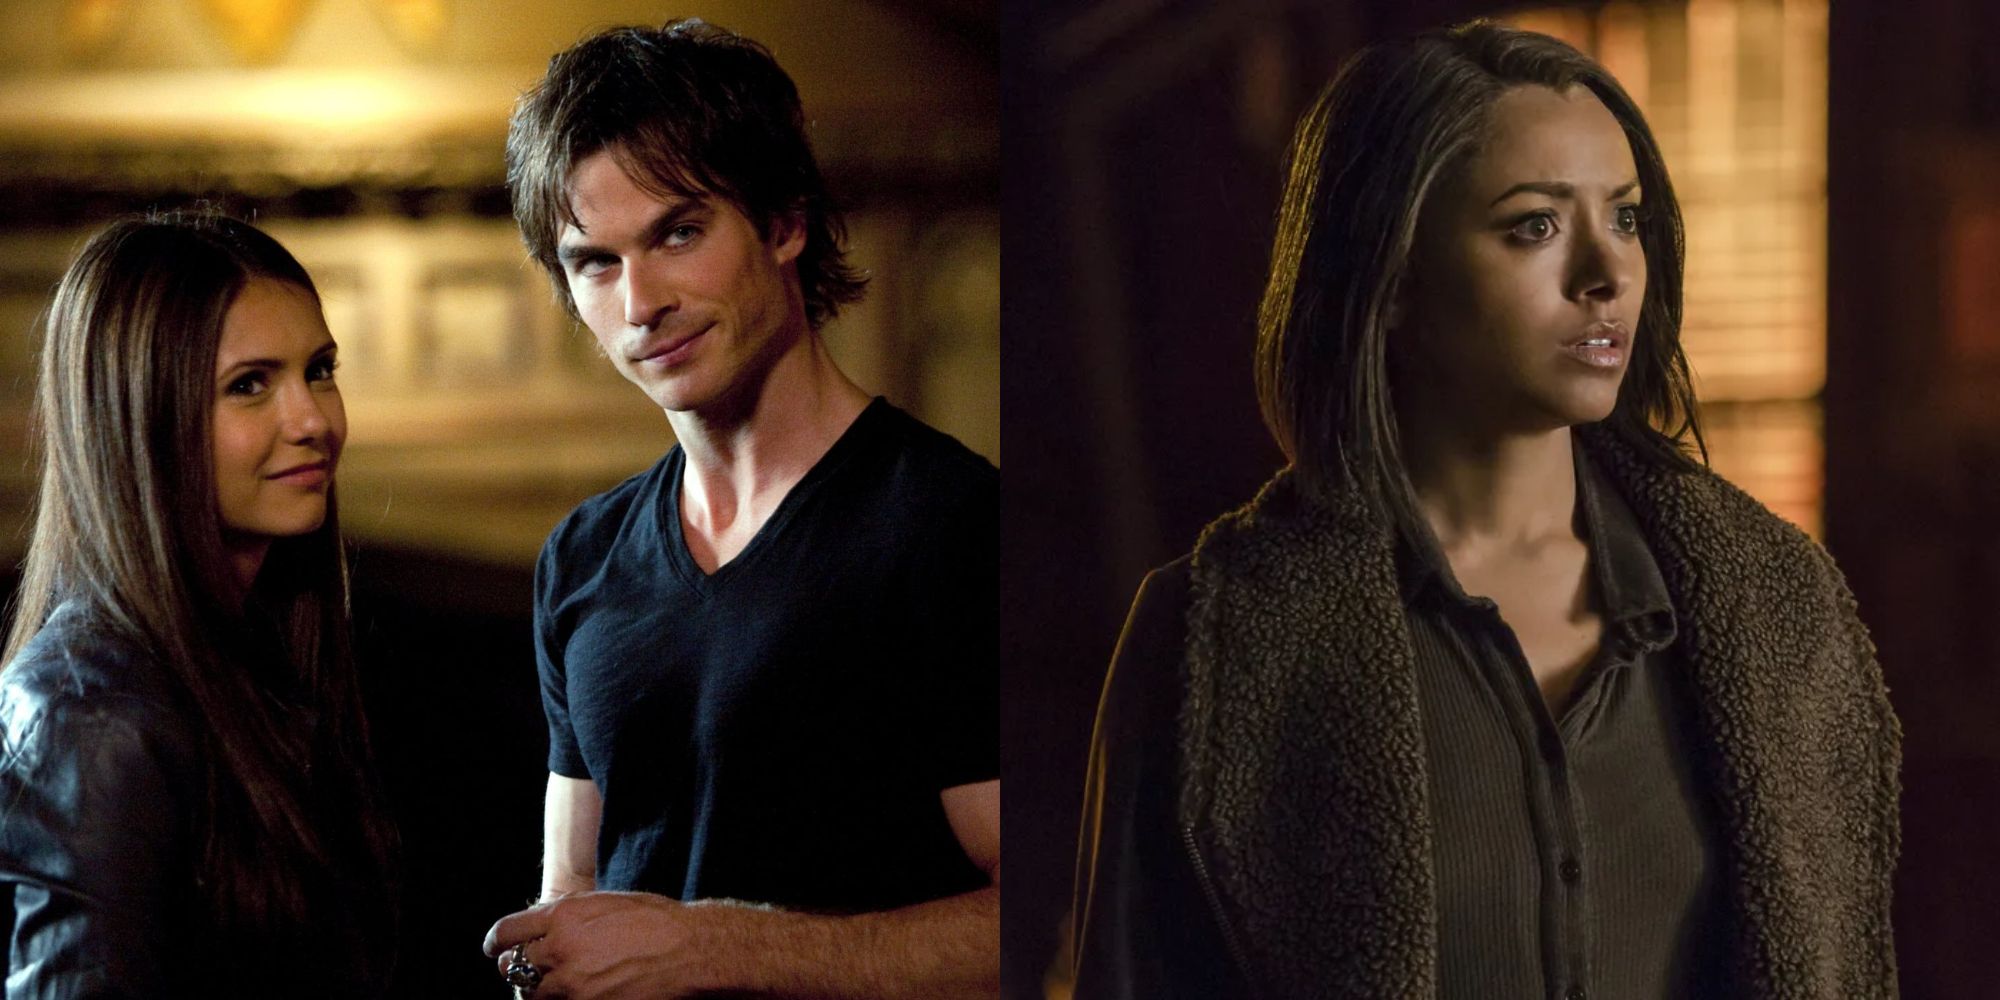 Side by side images of Elena and Damon and Bonnie in The Vampire Diaries